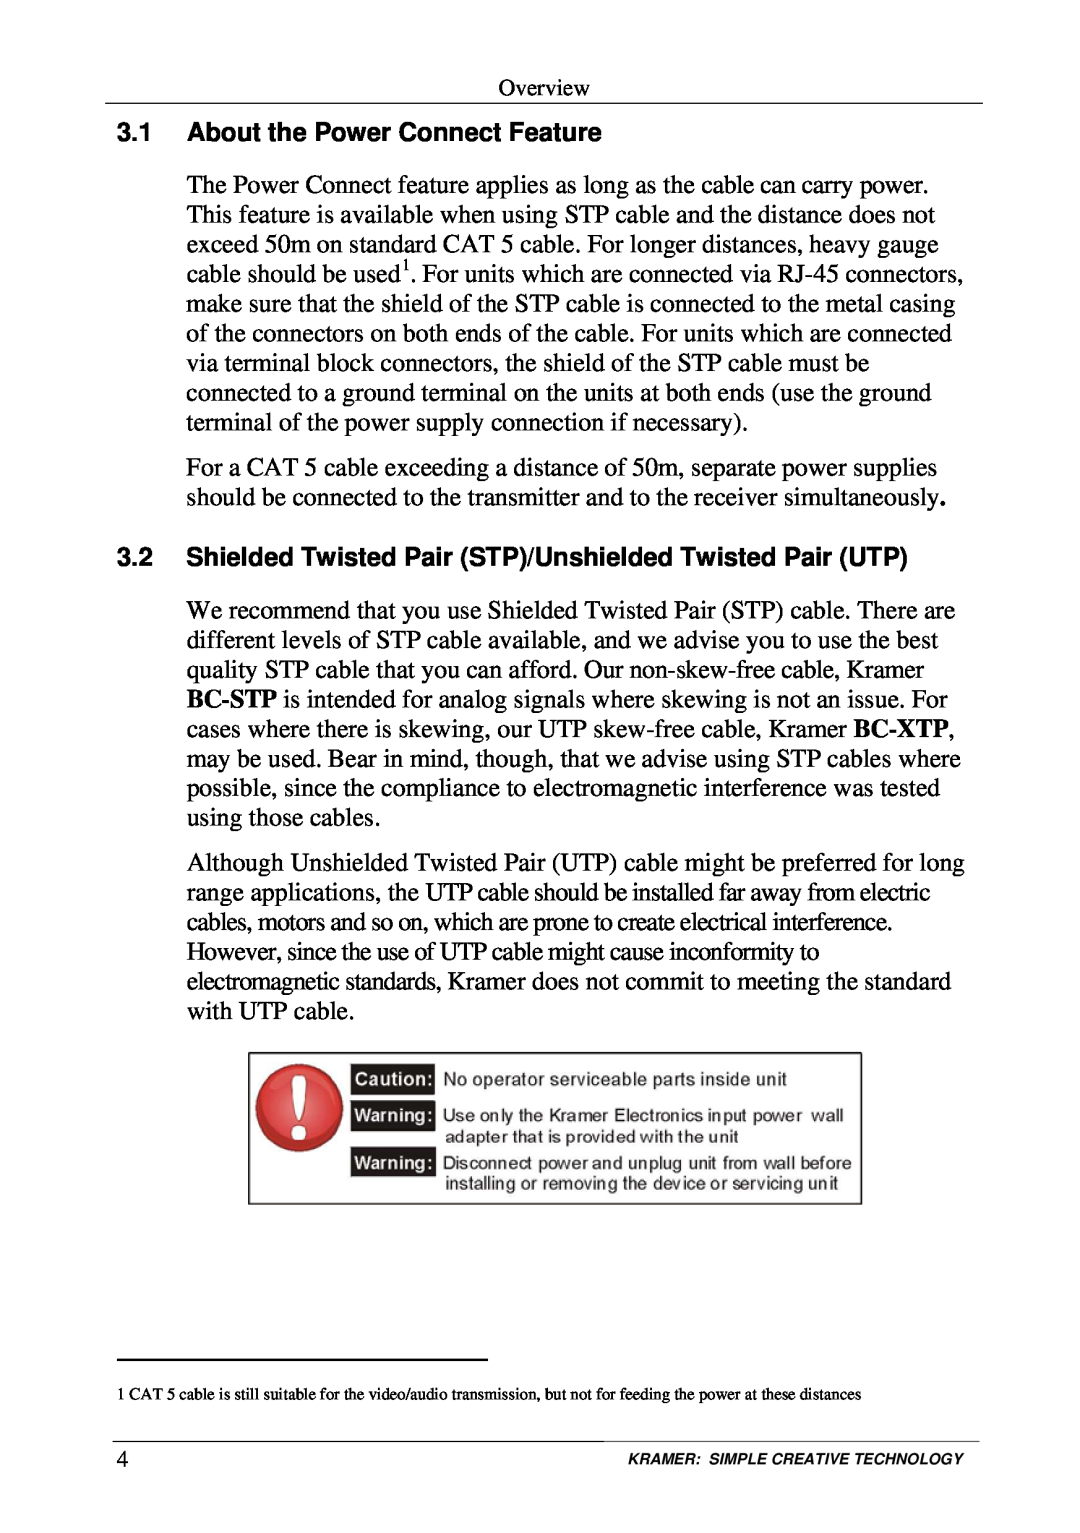 Kramer Electronics TP-9 user manual About the Power Connect Feature, Shielded Twisted Pair STP/Unshielded Twisted Pair UTP 